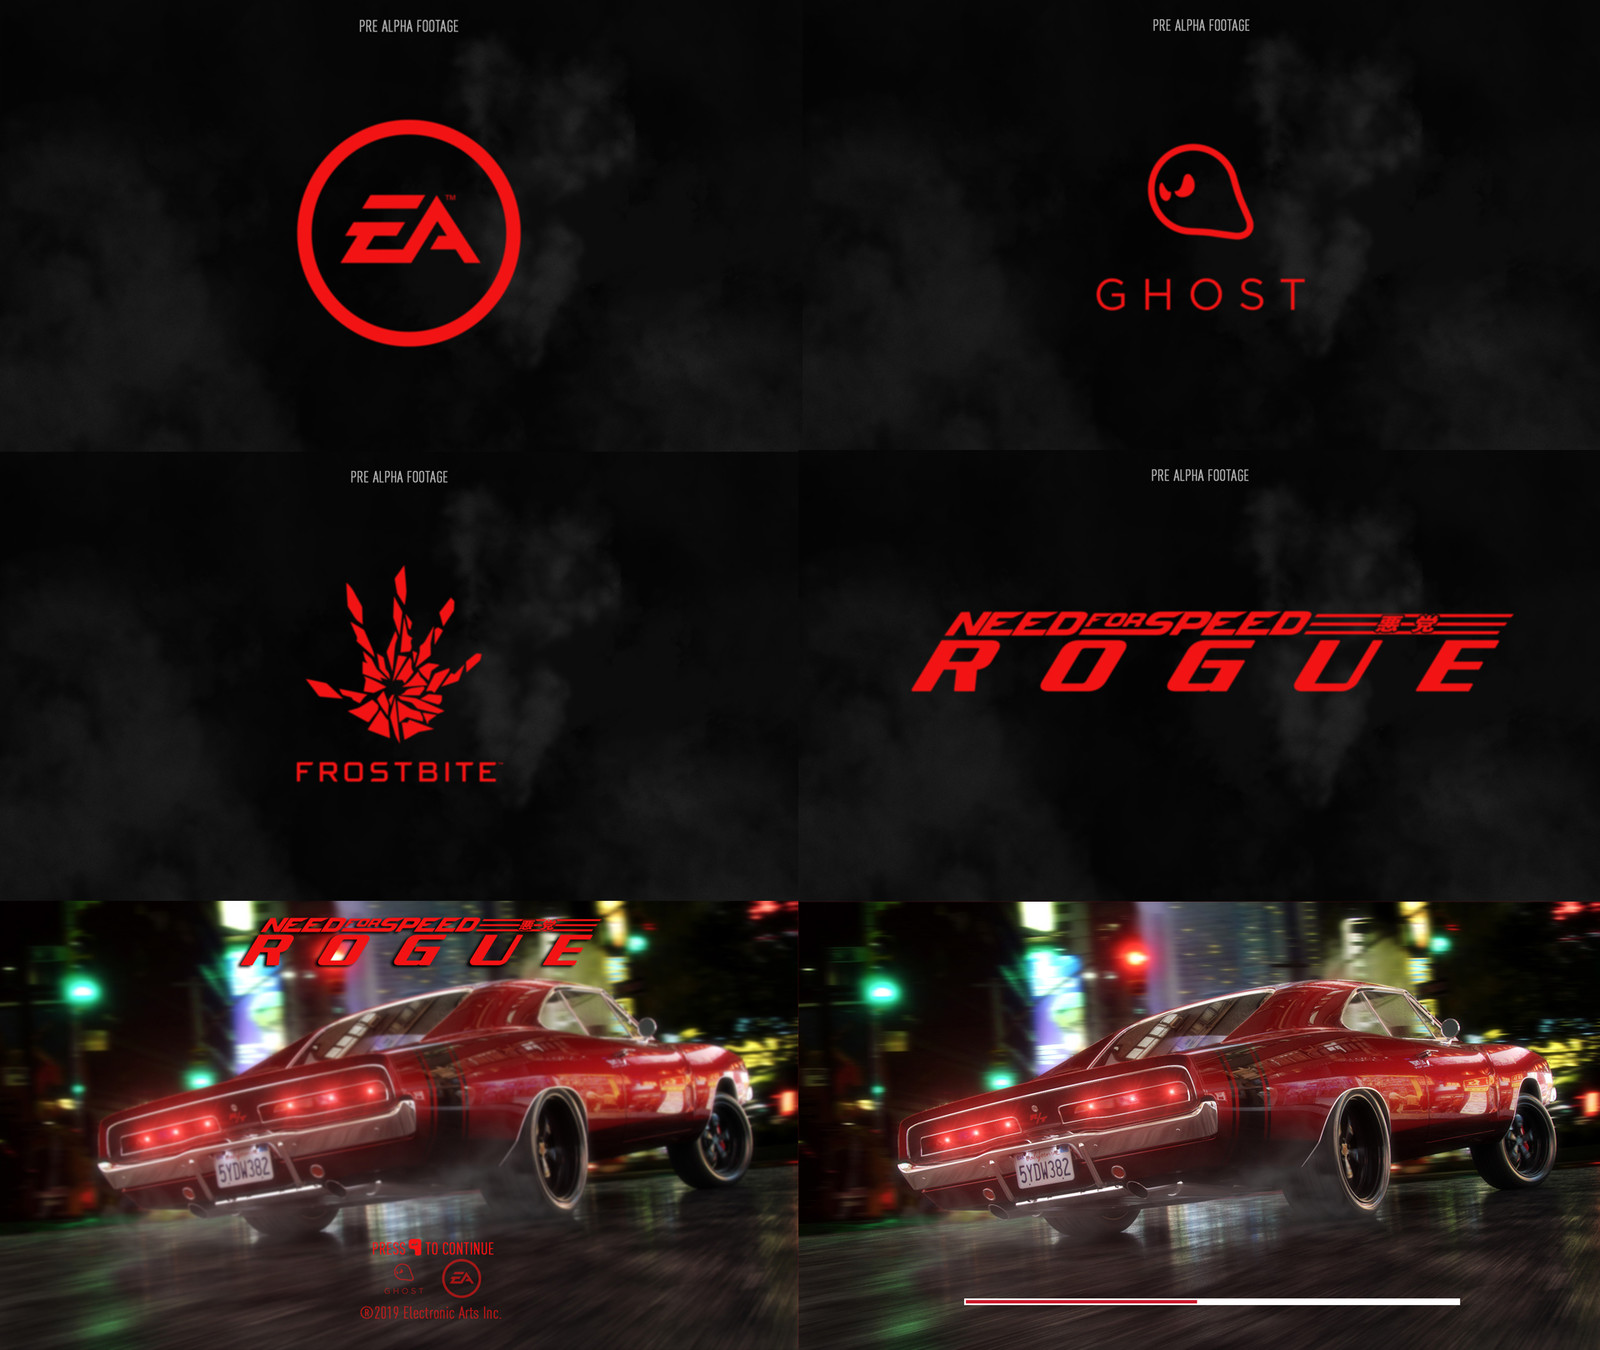 Need for Speed Rogue (Teaser Trailer Mockup)